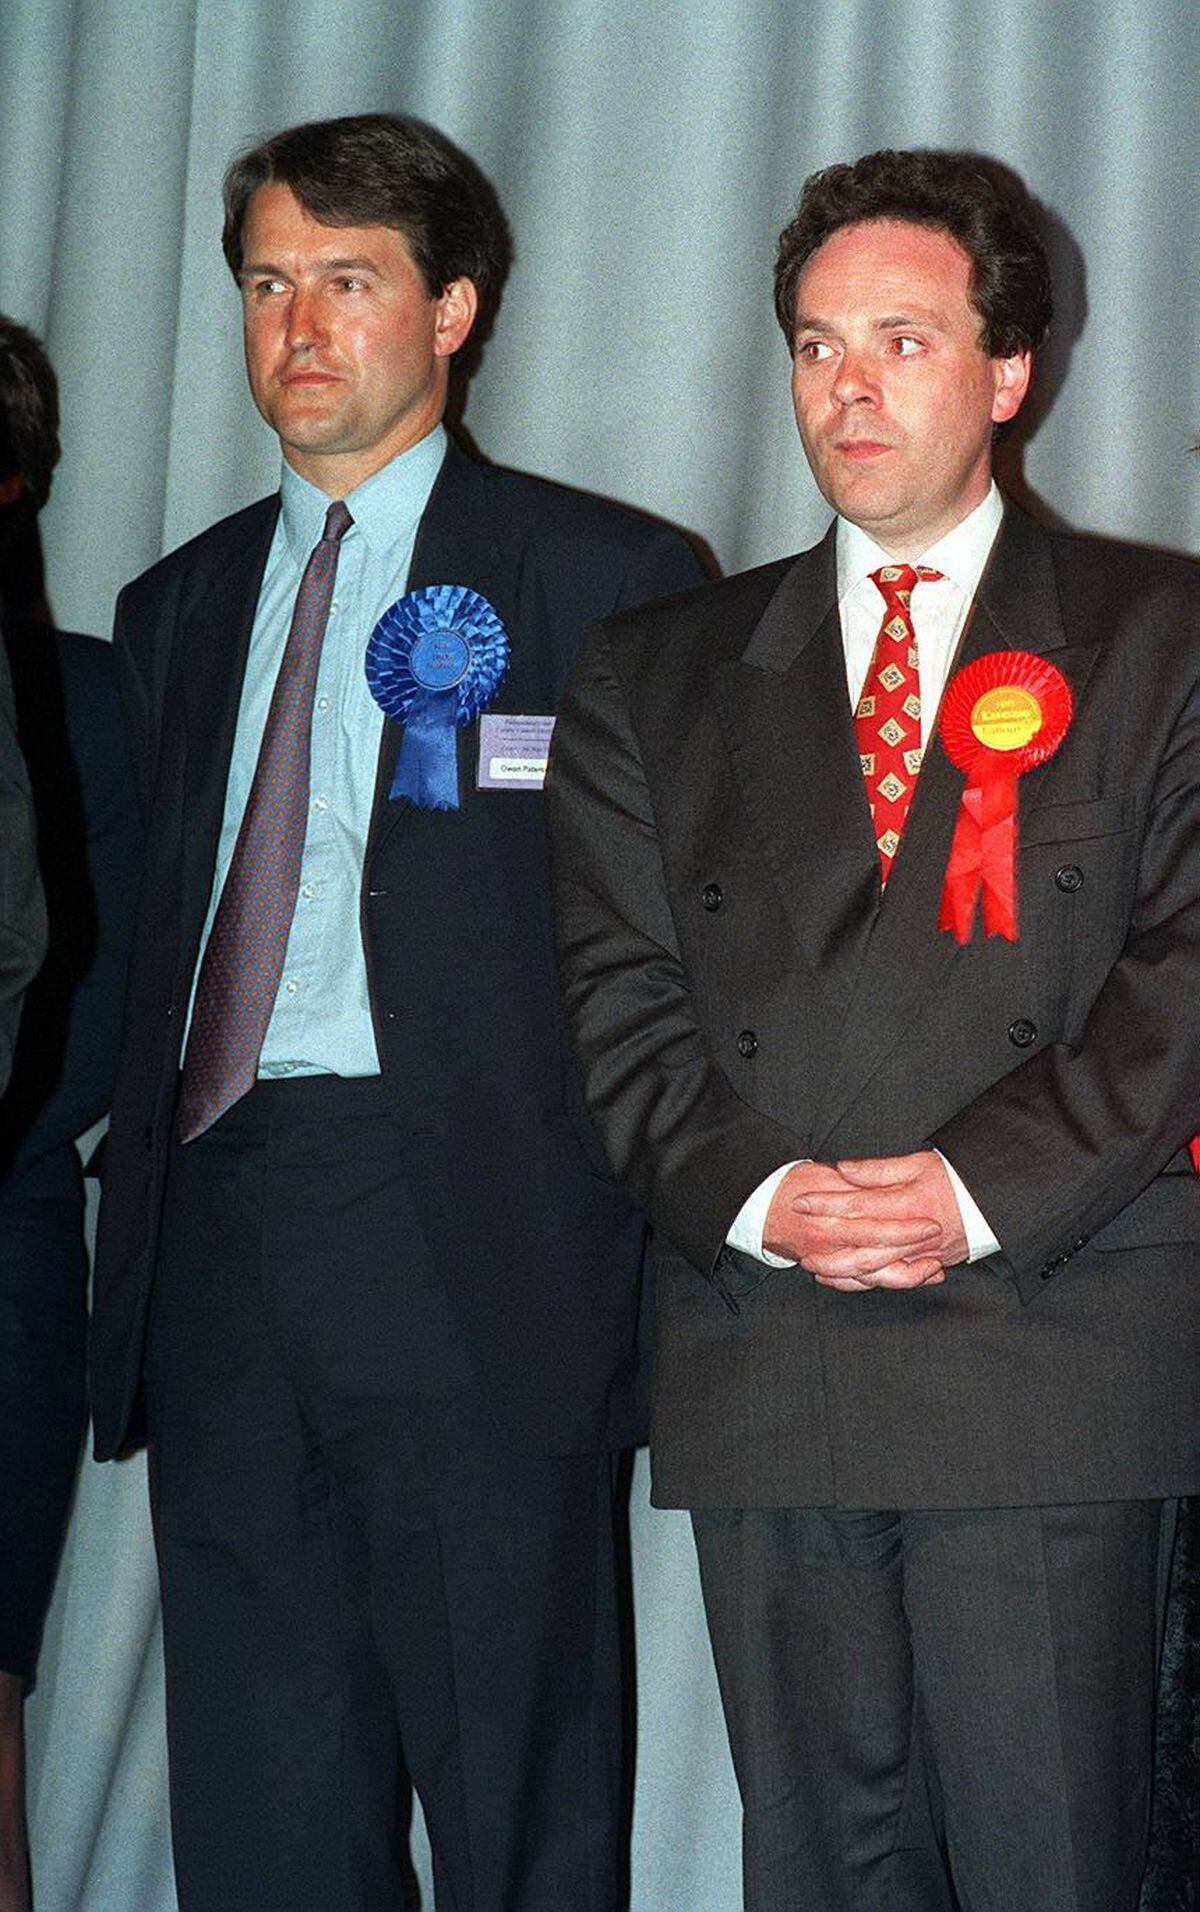 Owen Paterson, right, won North Shropshire for the Conservatives in 1997, but only 2,000 votes ahead of Labour's Ian Lucas, right